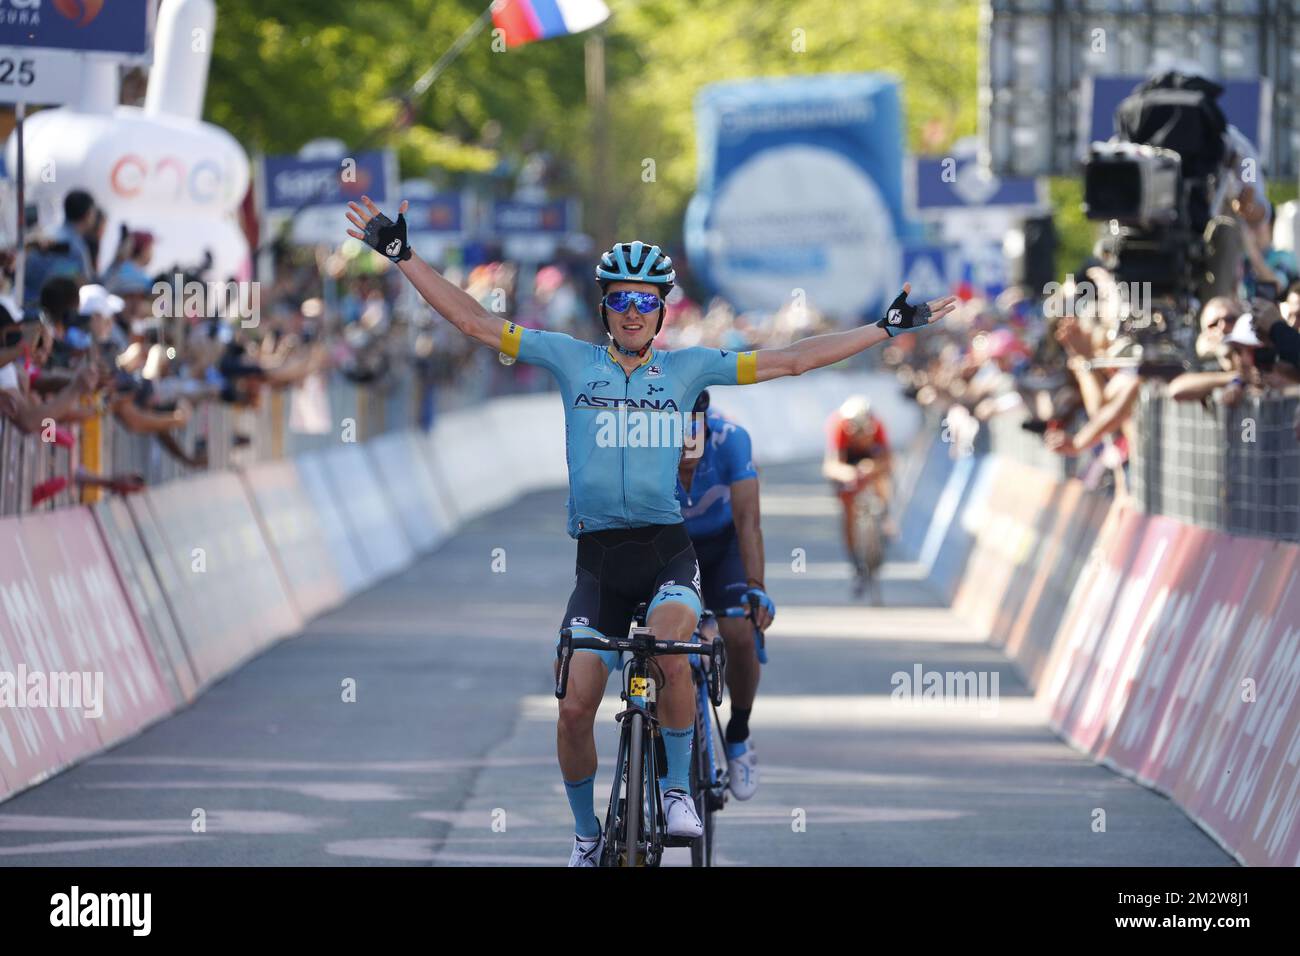 Spanish Pello Bilbao of Astana Pro Team crosses the finish line to win the twentieth stage of the 101st edition of the Giro D'Italia cycling race, 194km from Feltre to Croce d'Aune-Monte Avena, Italy, Saturday 01 June 2019. BELGA PHOTO YUZURU SUNADA FRANCE OUT  Stock Photo